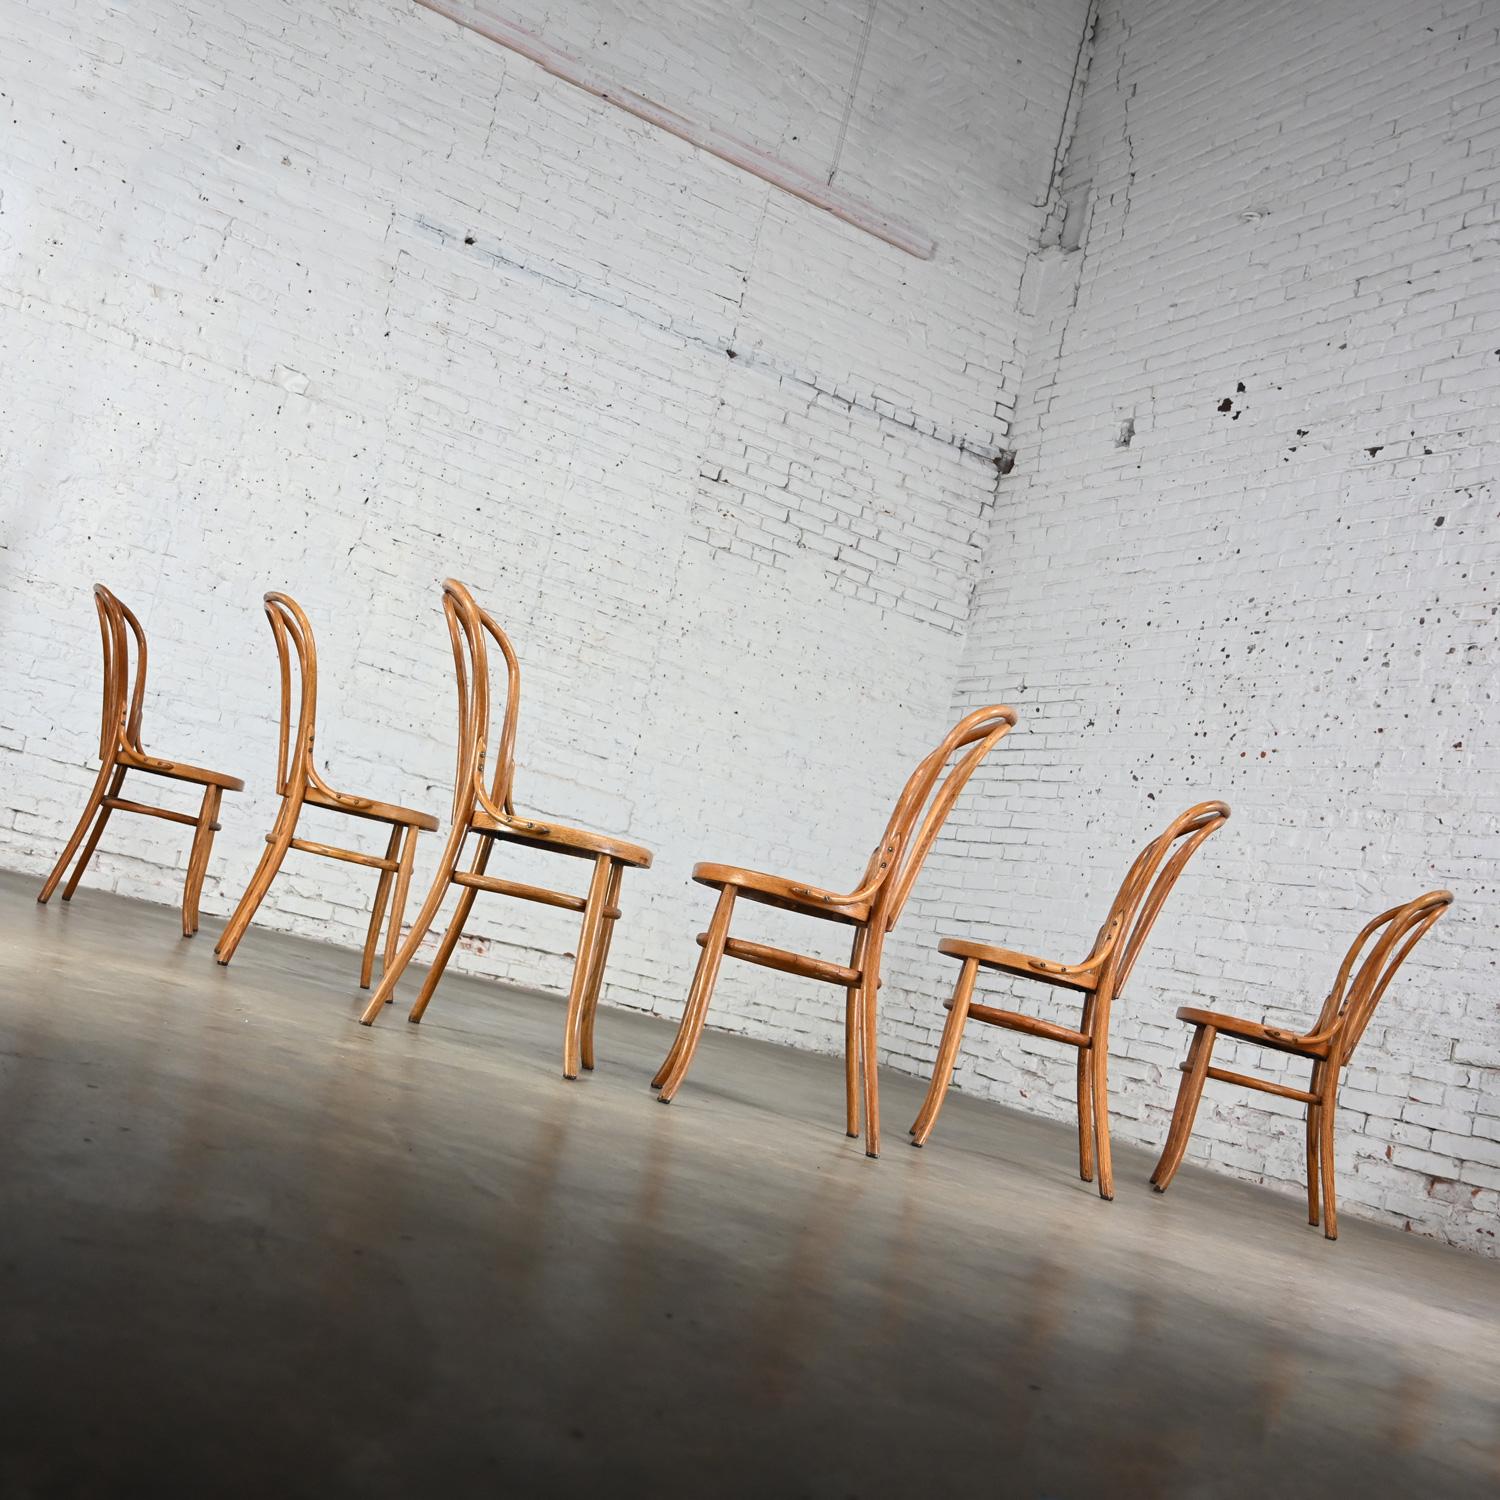 Bauhaus Oak Bentwood Chairs Attributed to Thonet #18 Café Chair Set of 6 For Sale 8